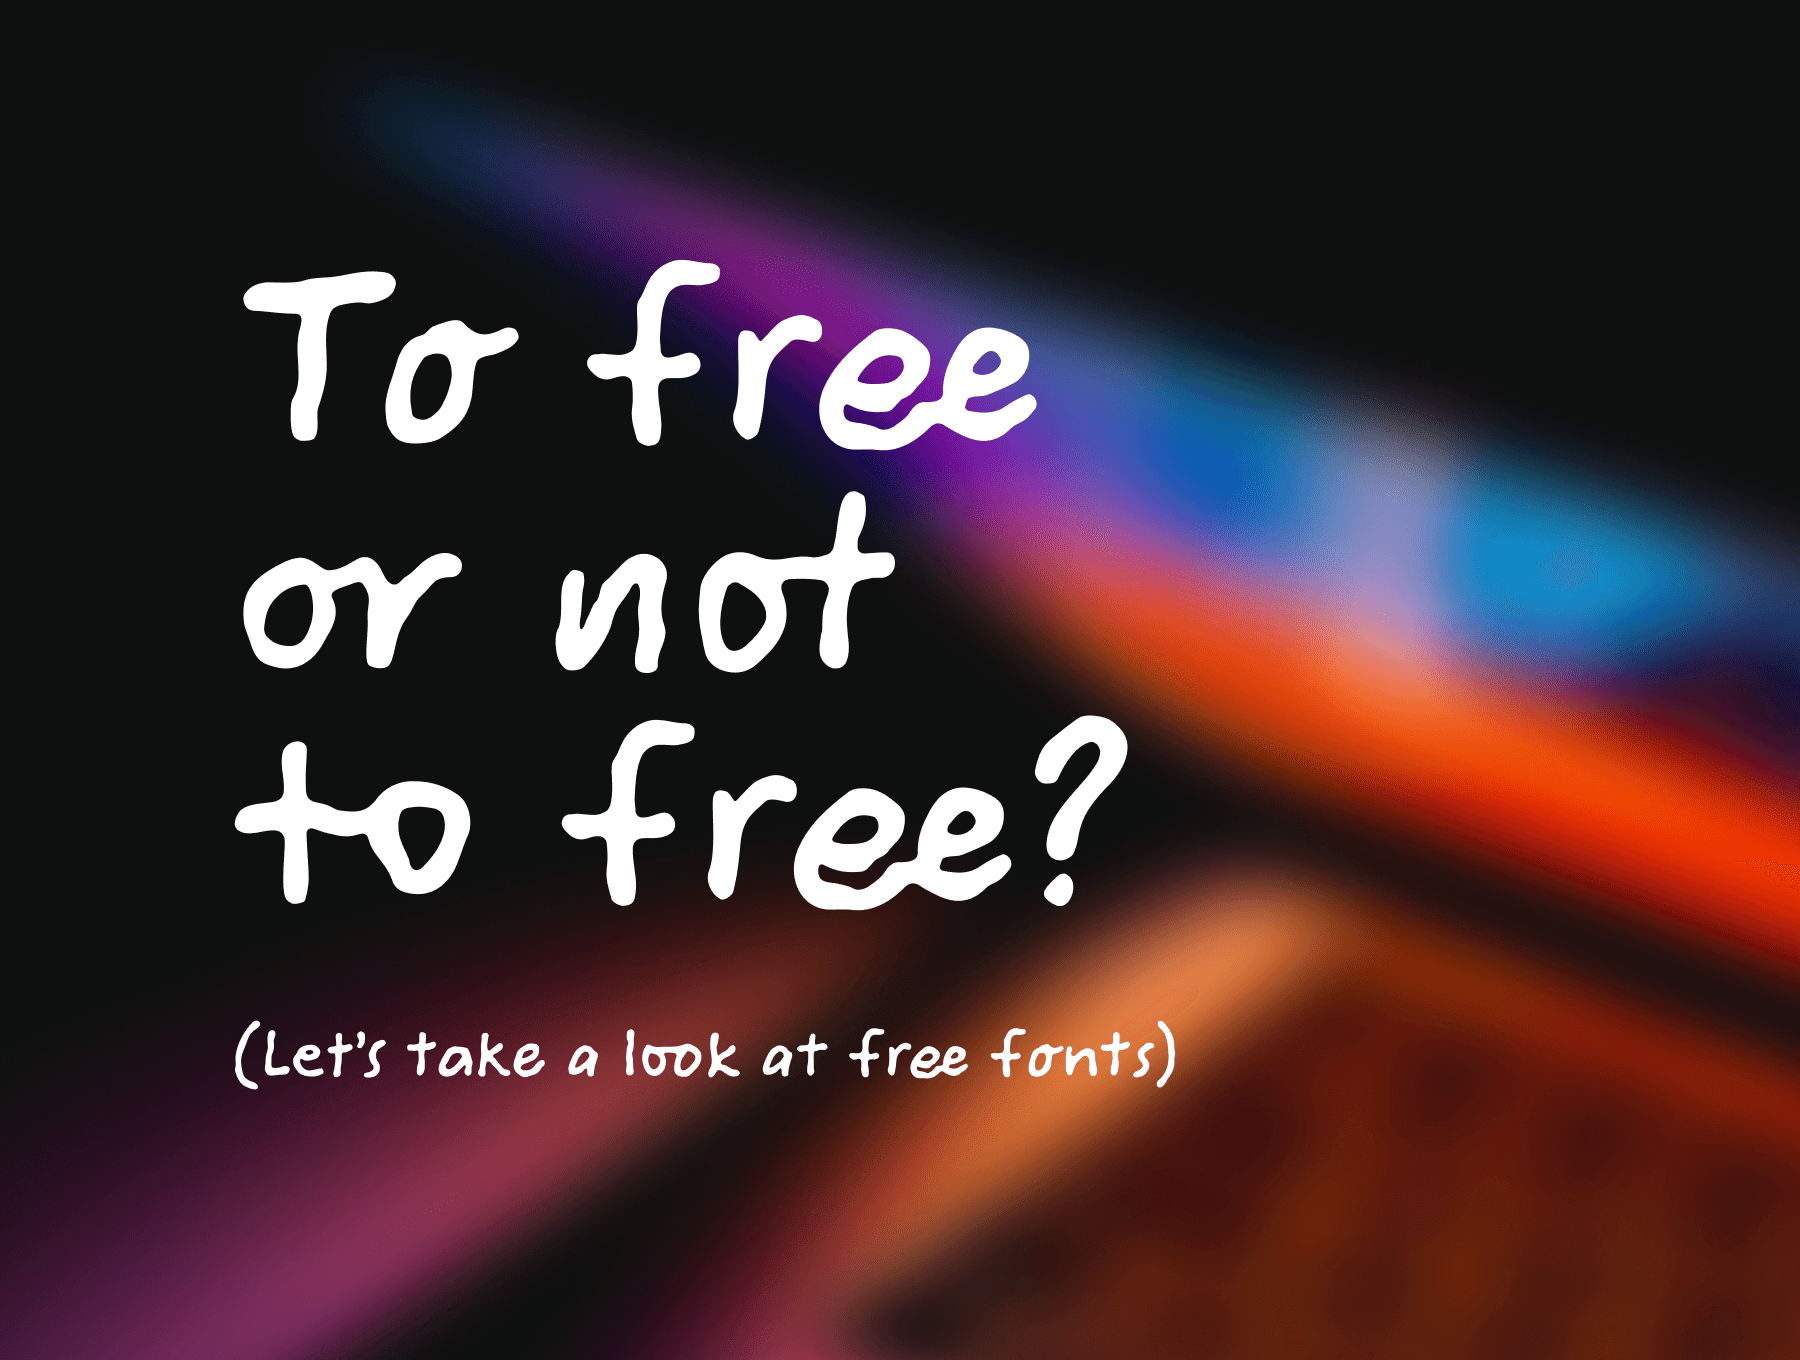 Pros and cons of using free fonts